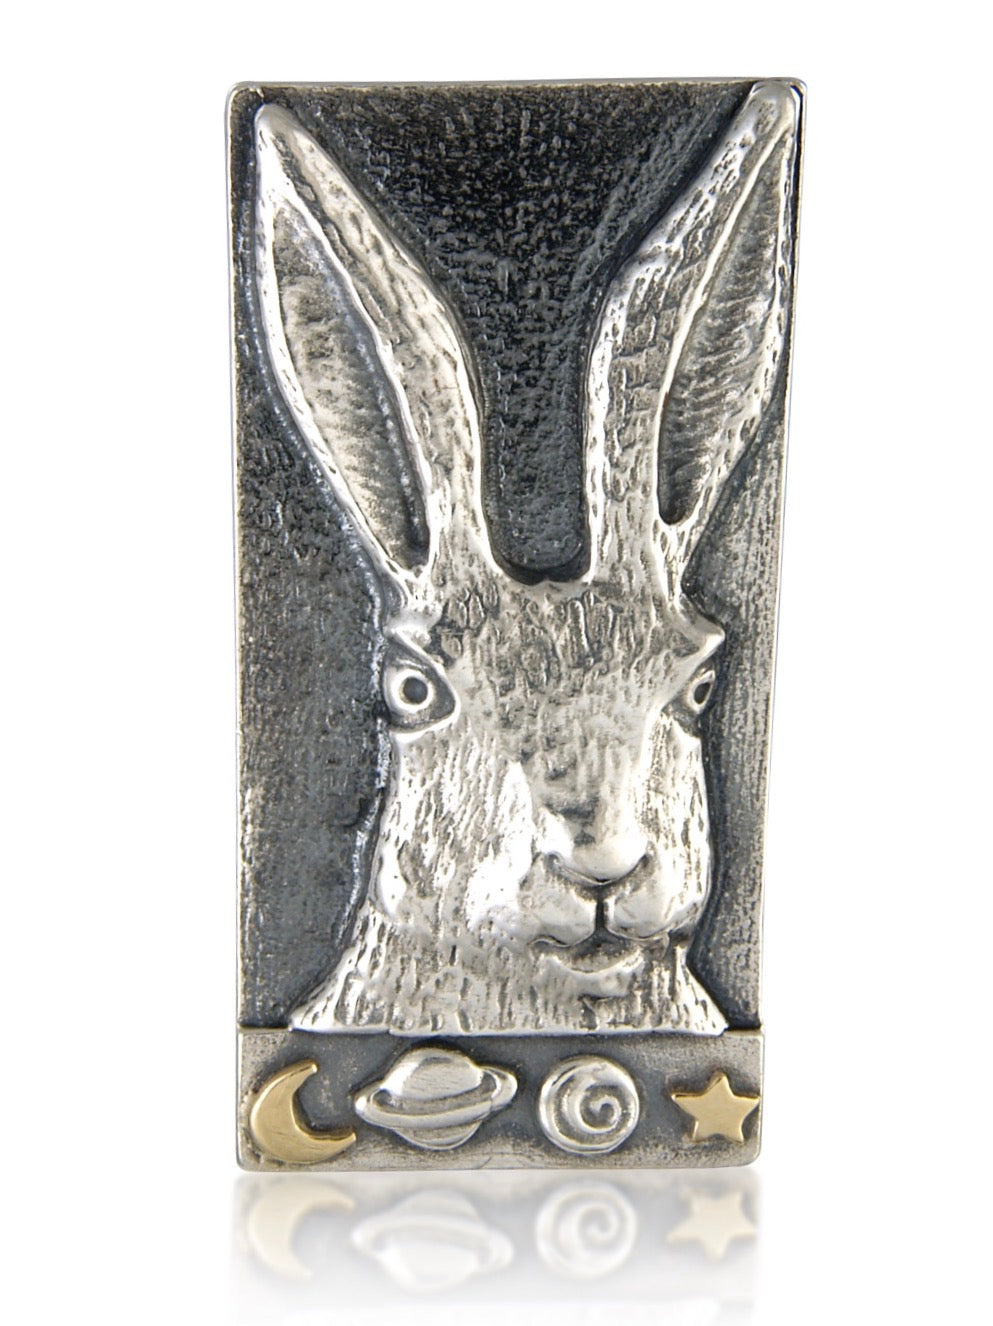 'Handsome Hare', brooch